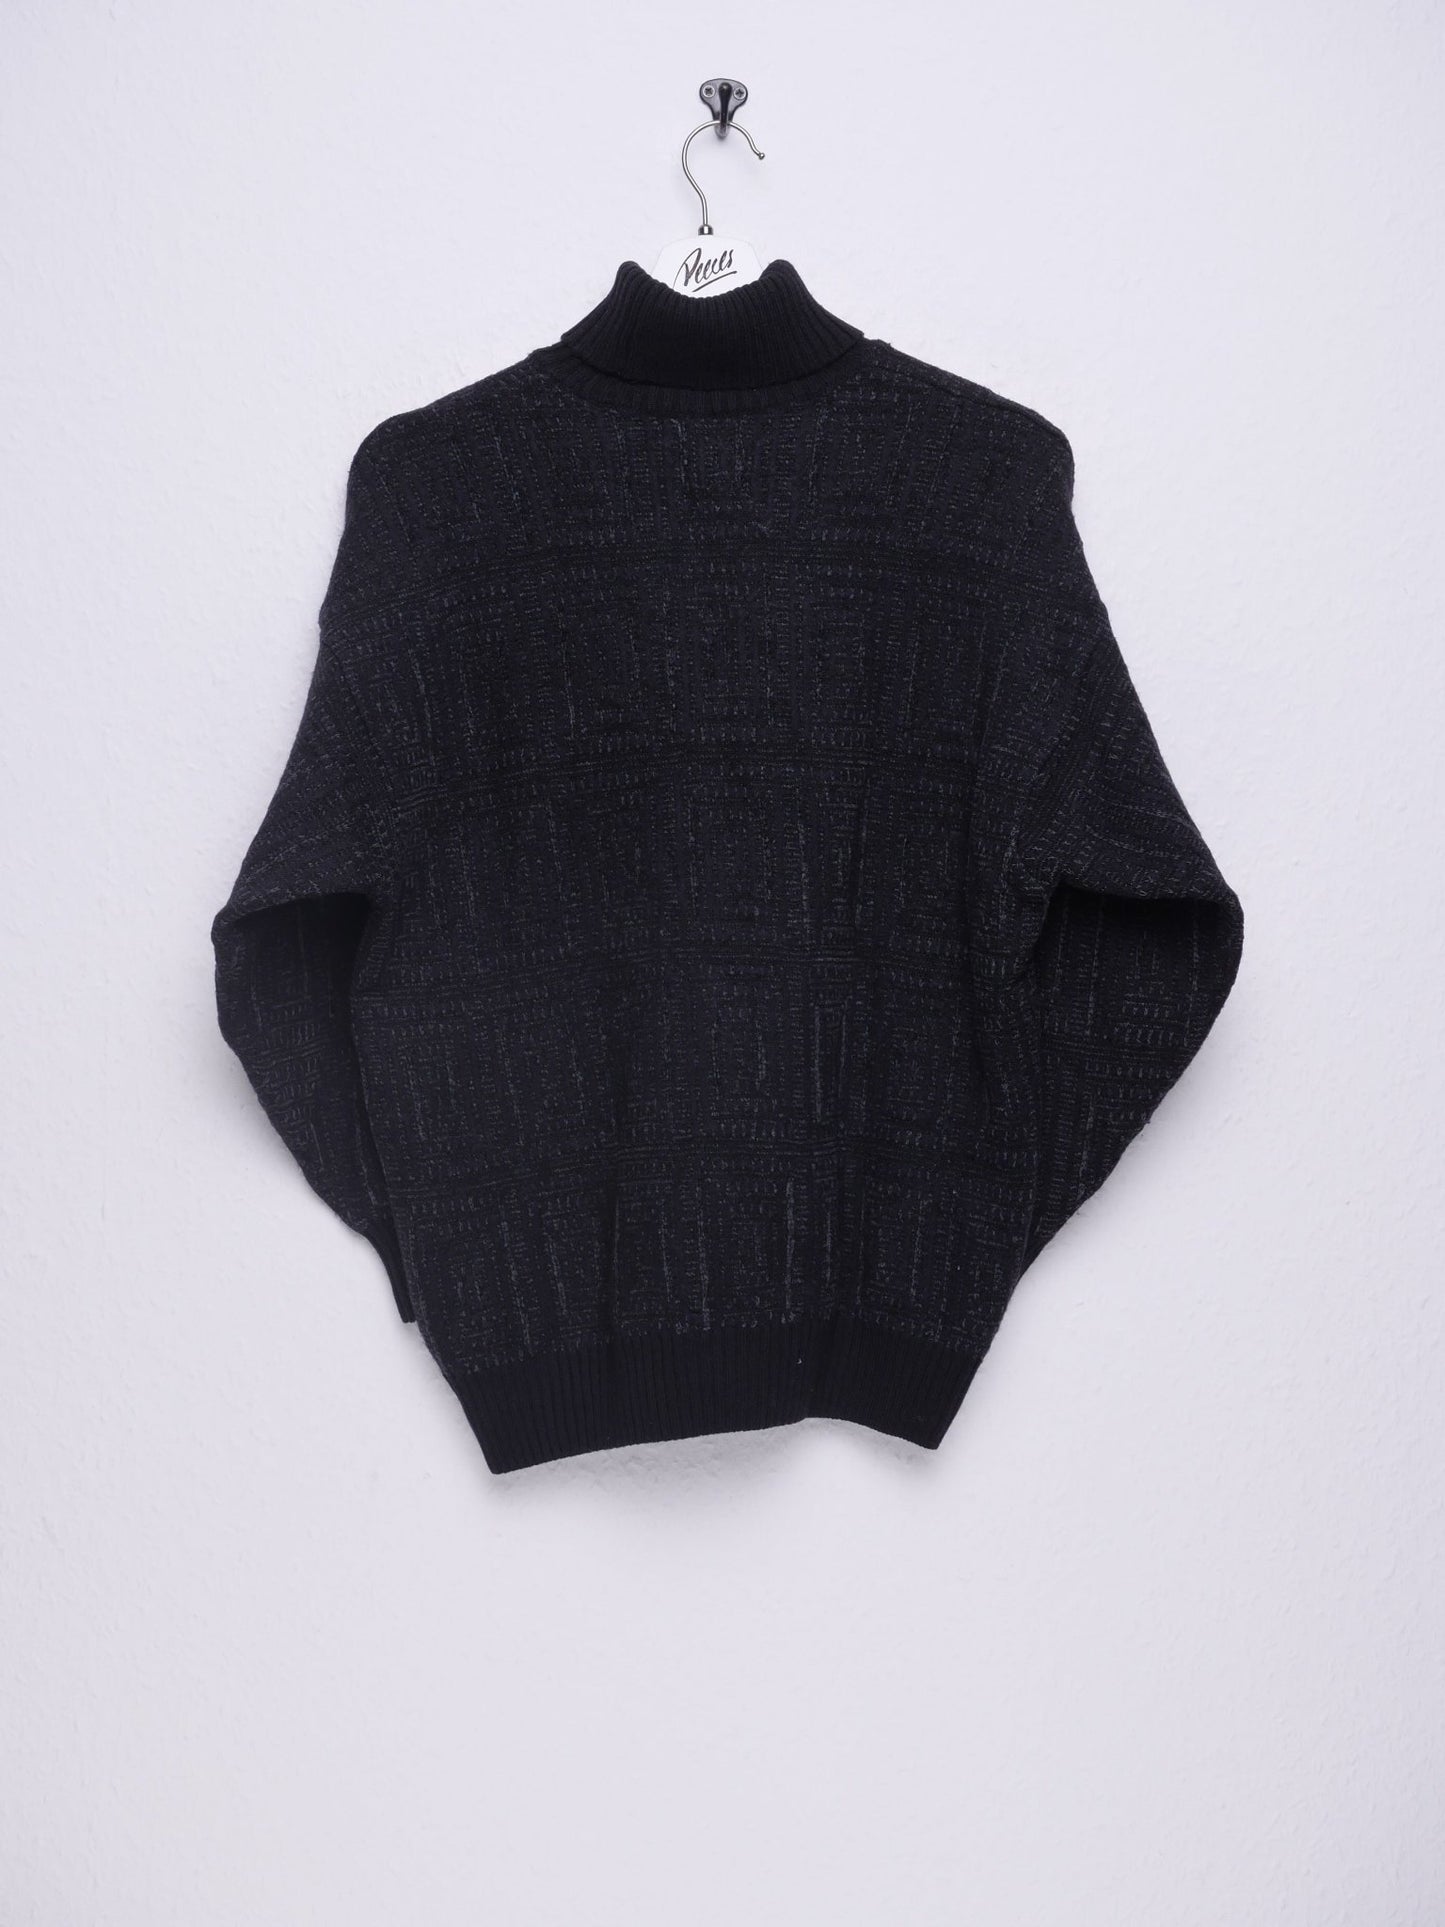 knitted black Turtleneck Sweater - Peeces